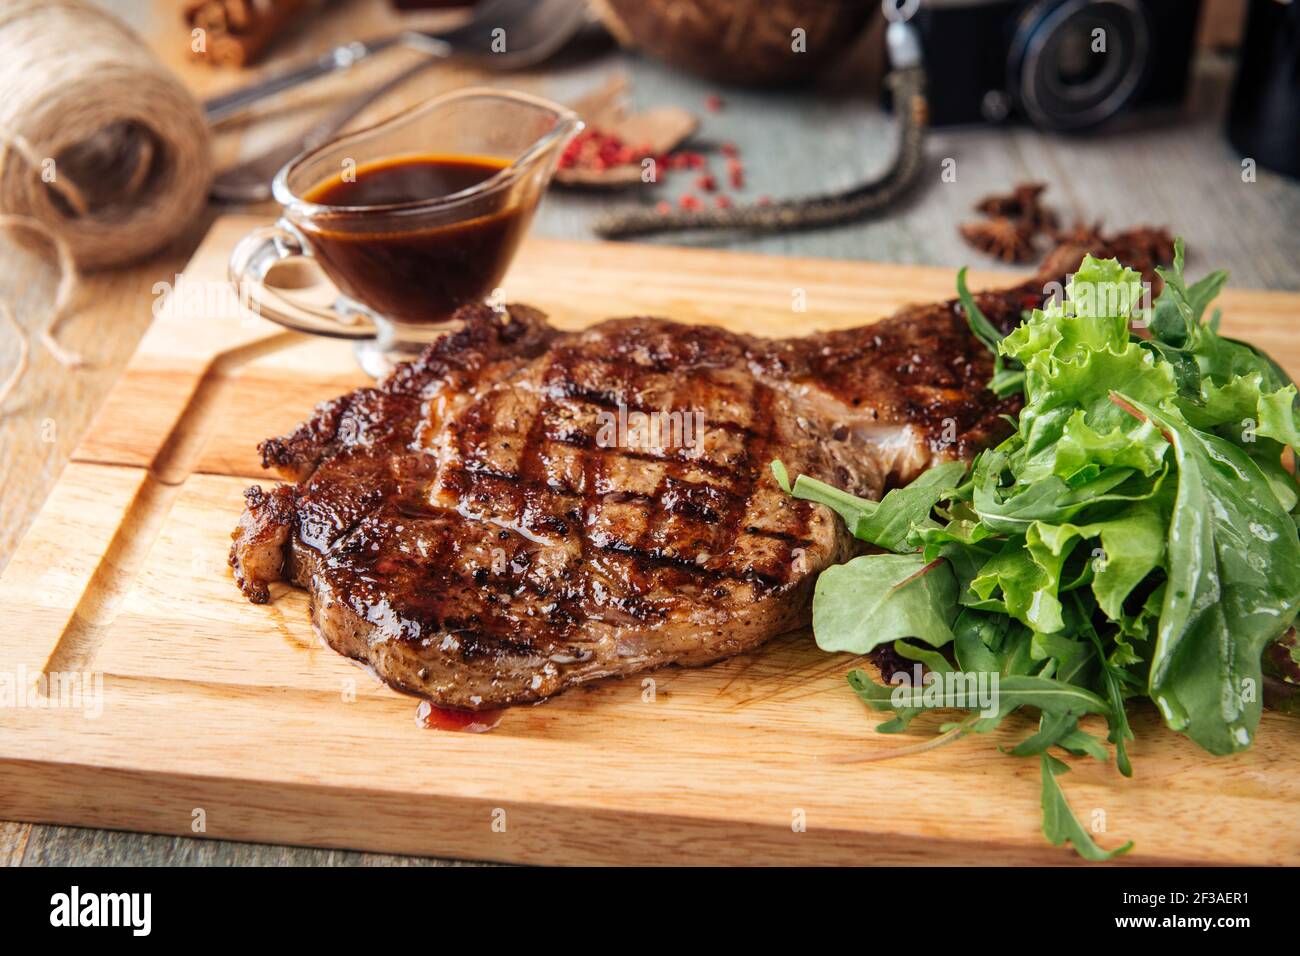 Grilled beef meat steak with pepper sauce Stock Photo